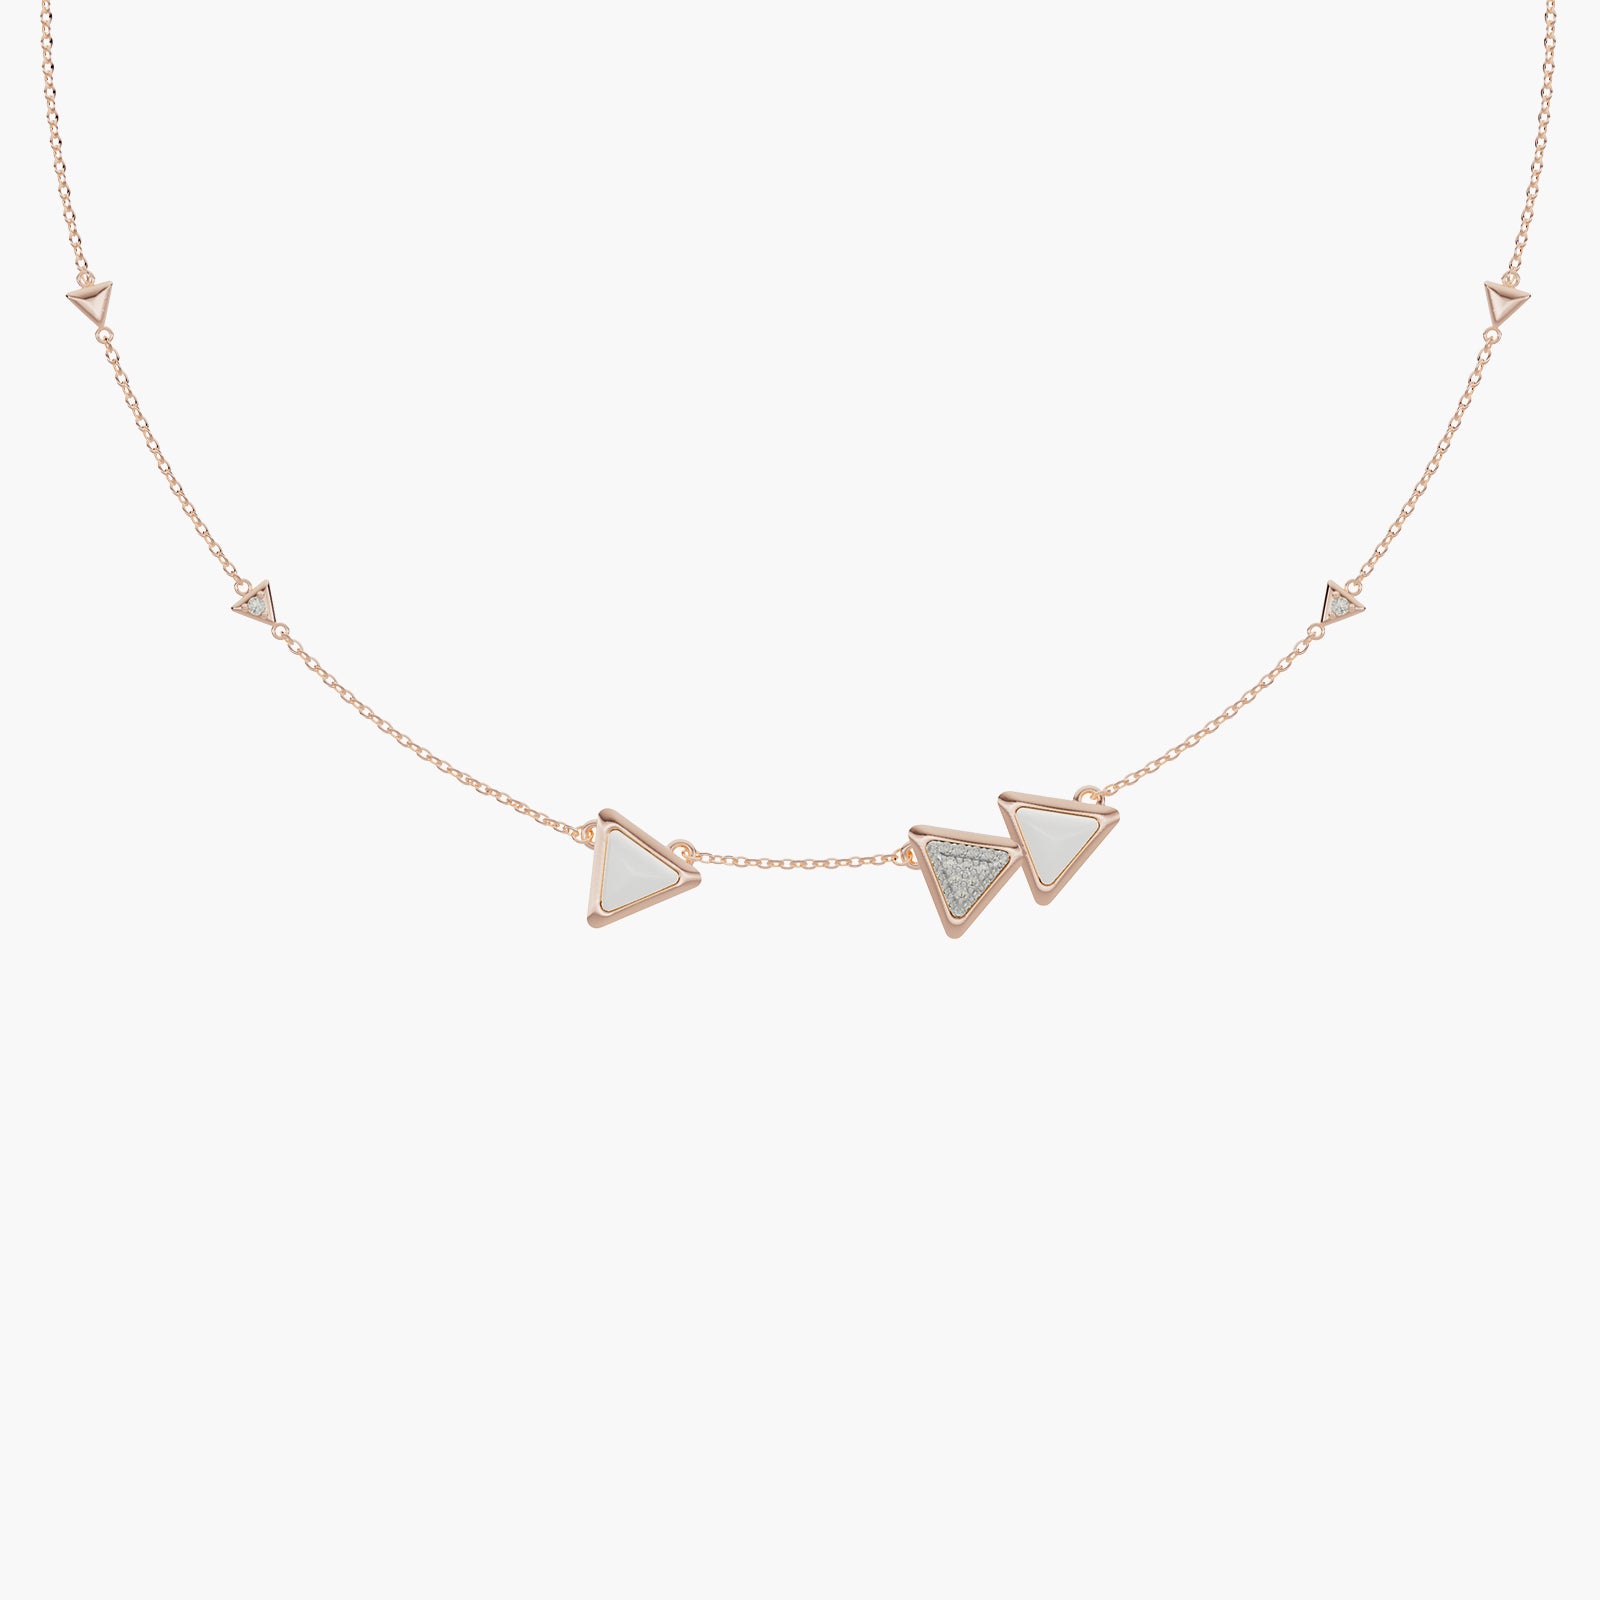 Necklace Dove Vai Forward Exquisite Rose Gold Kogolong and Diamonds